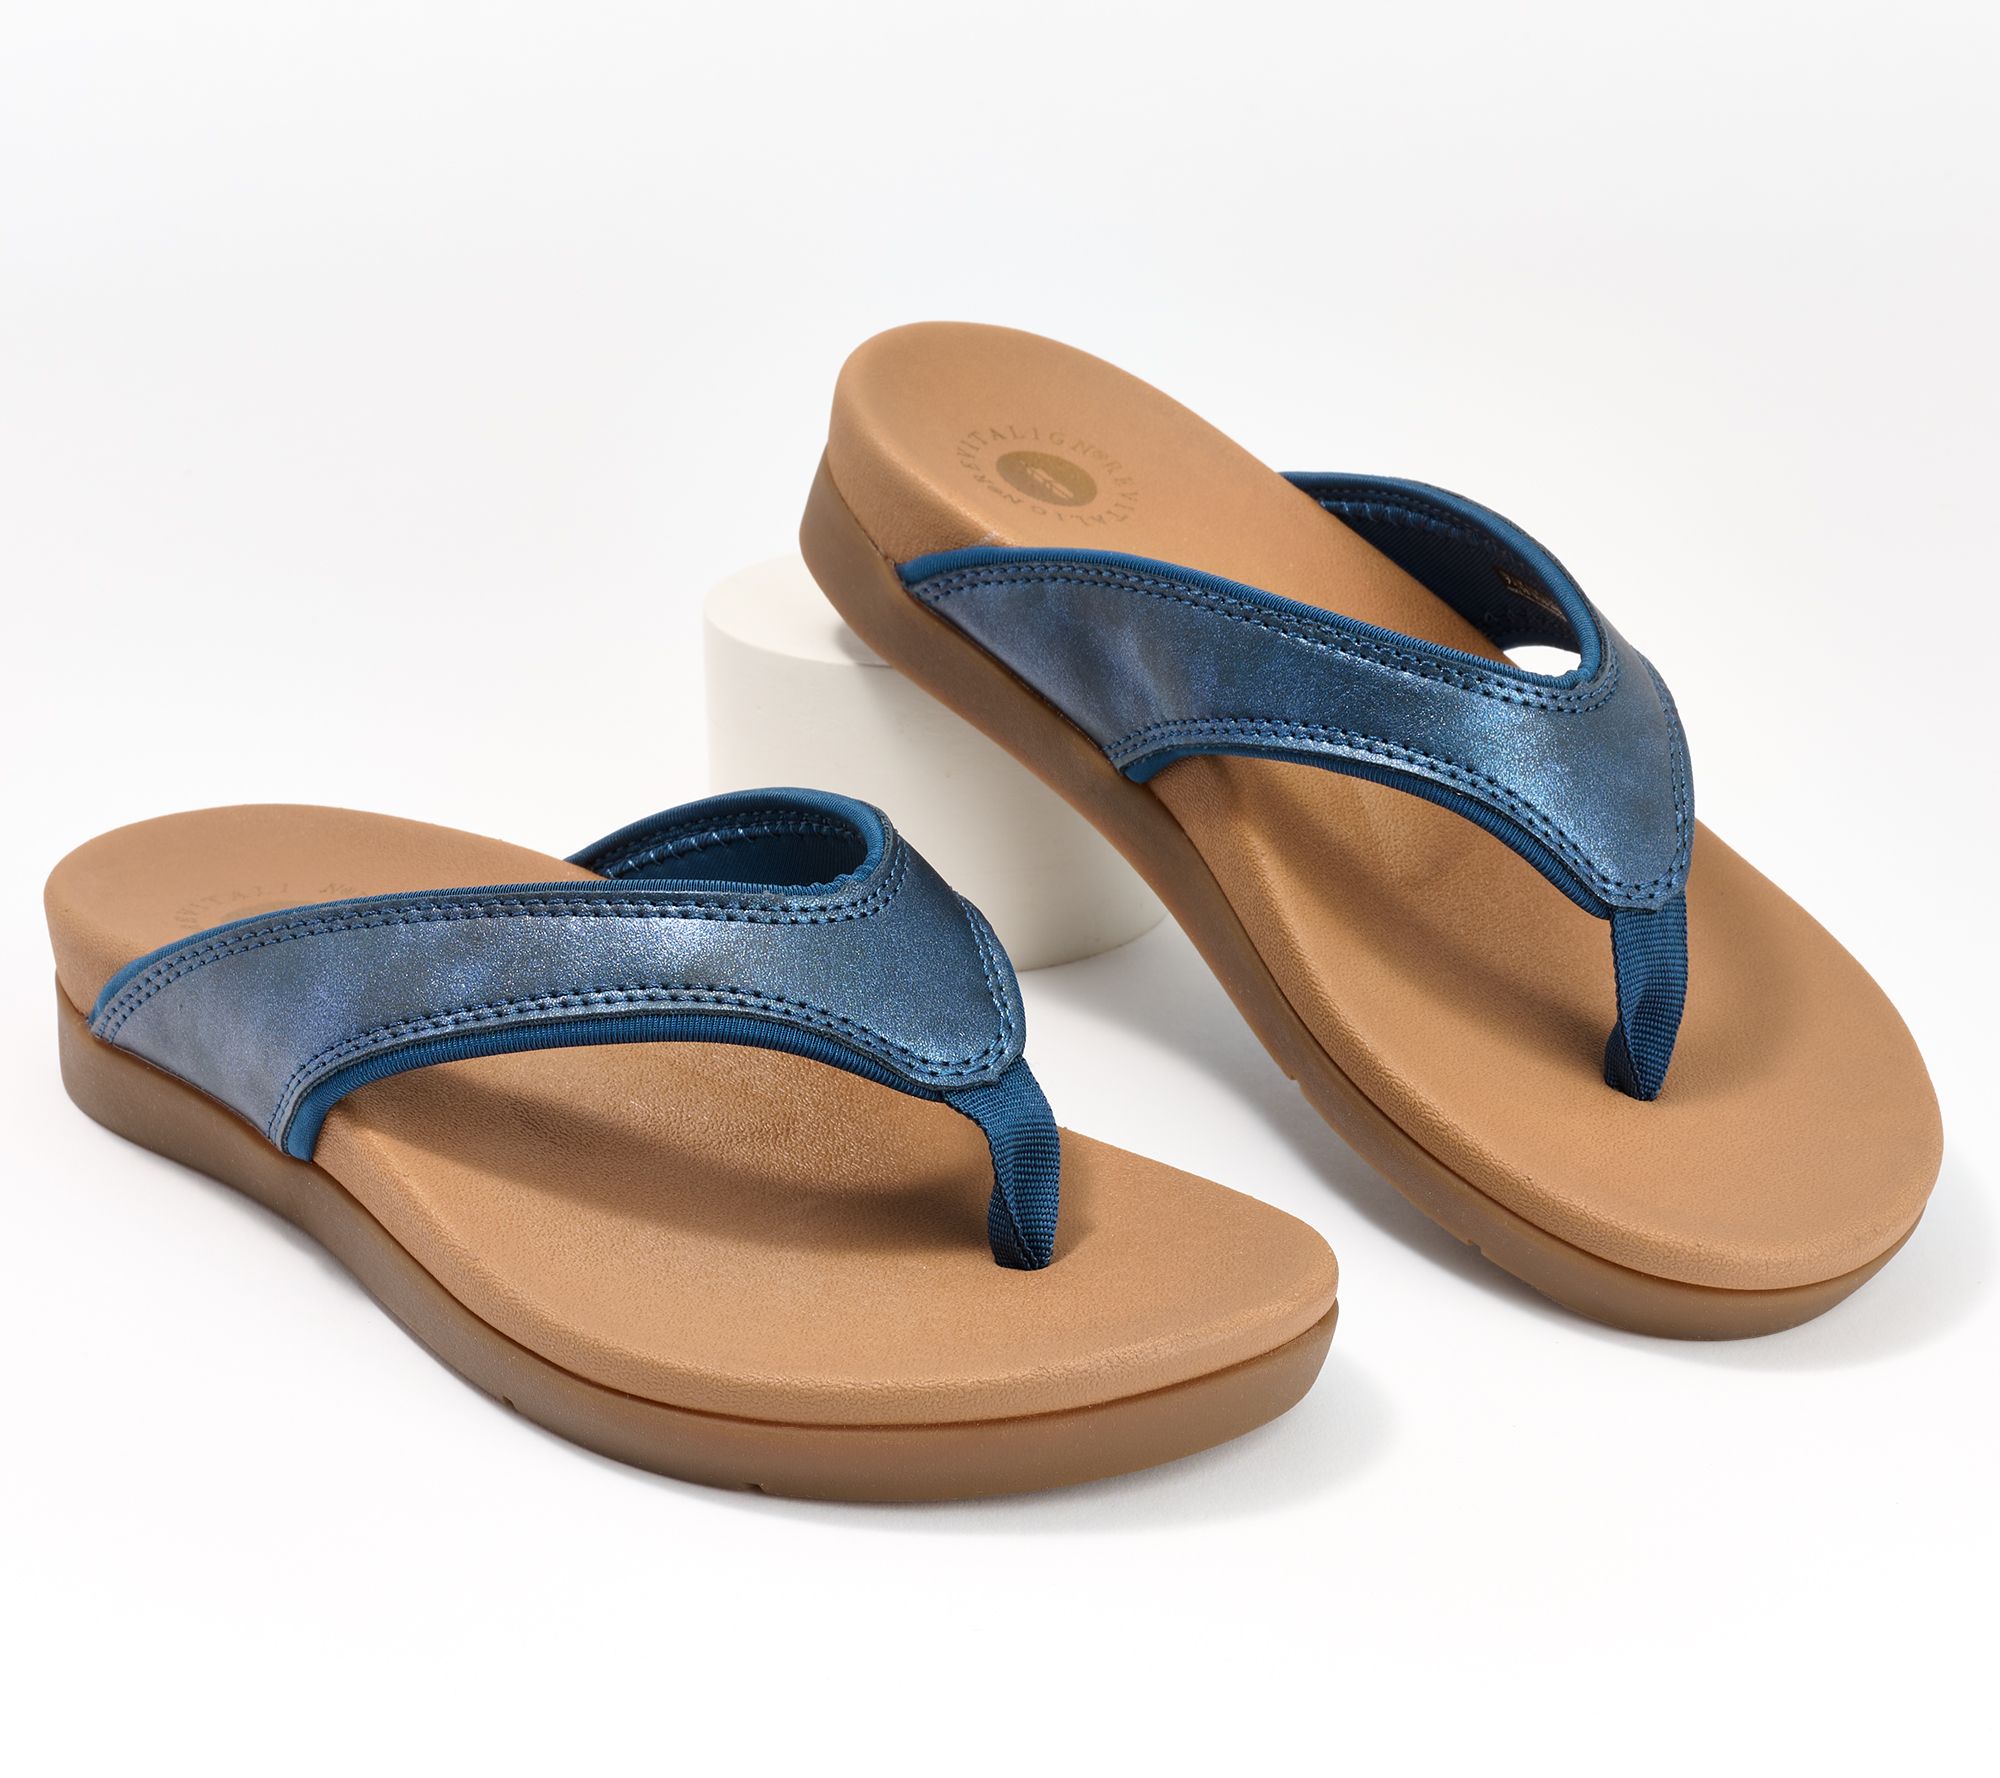 Vionic Patent Leather Thong Sandals - Tide Sport 